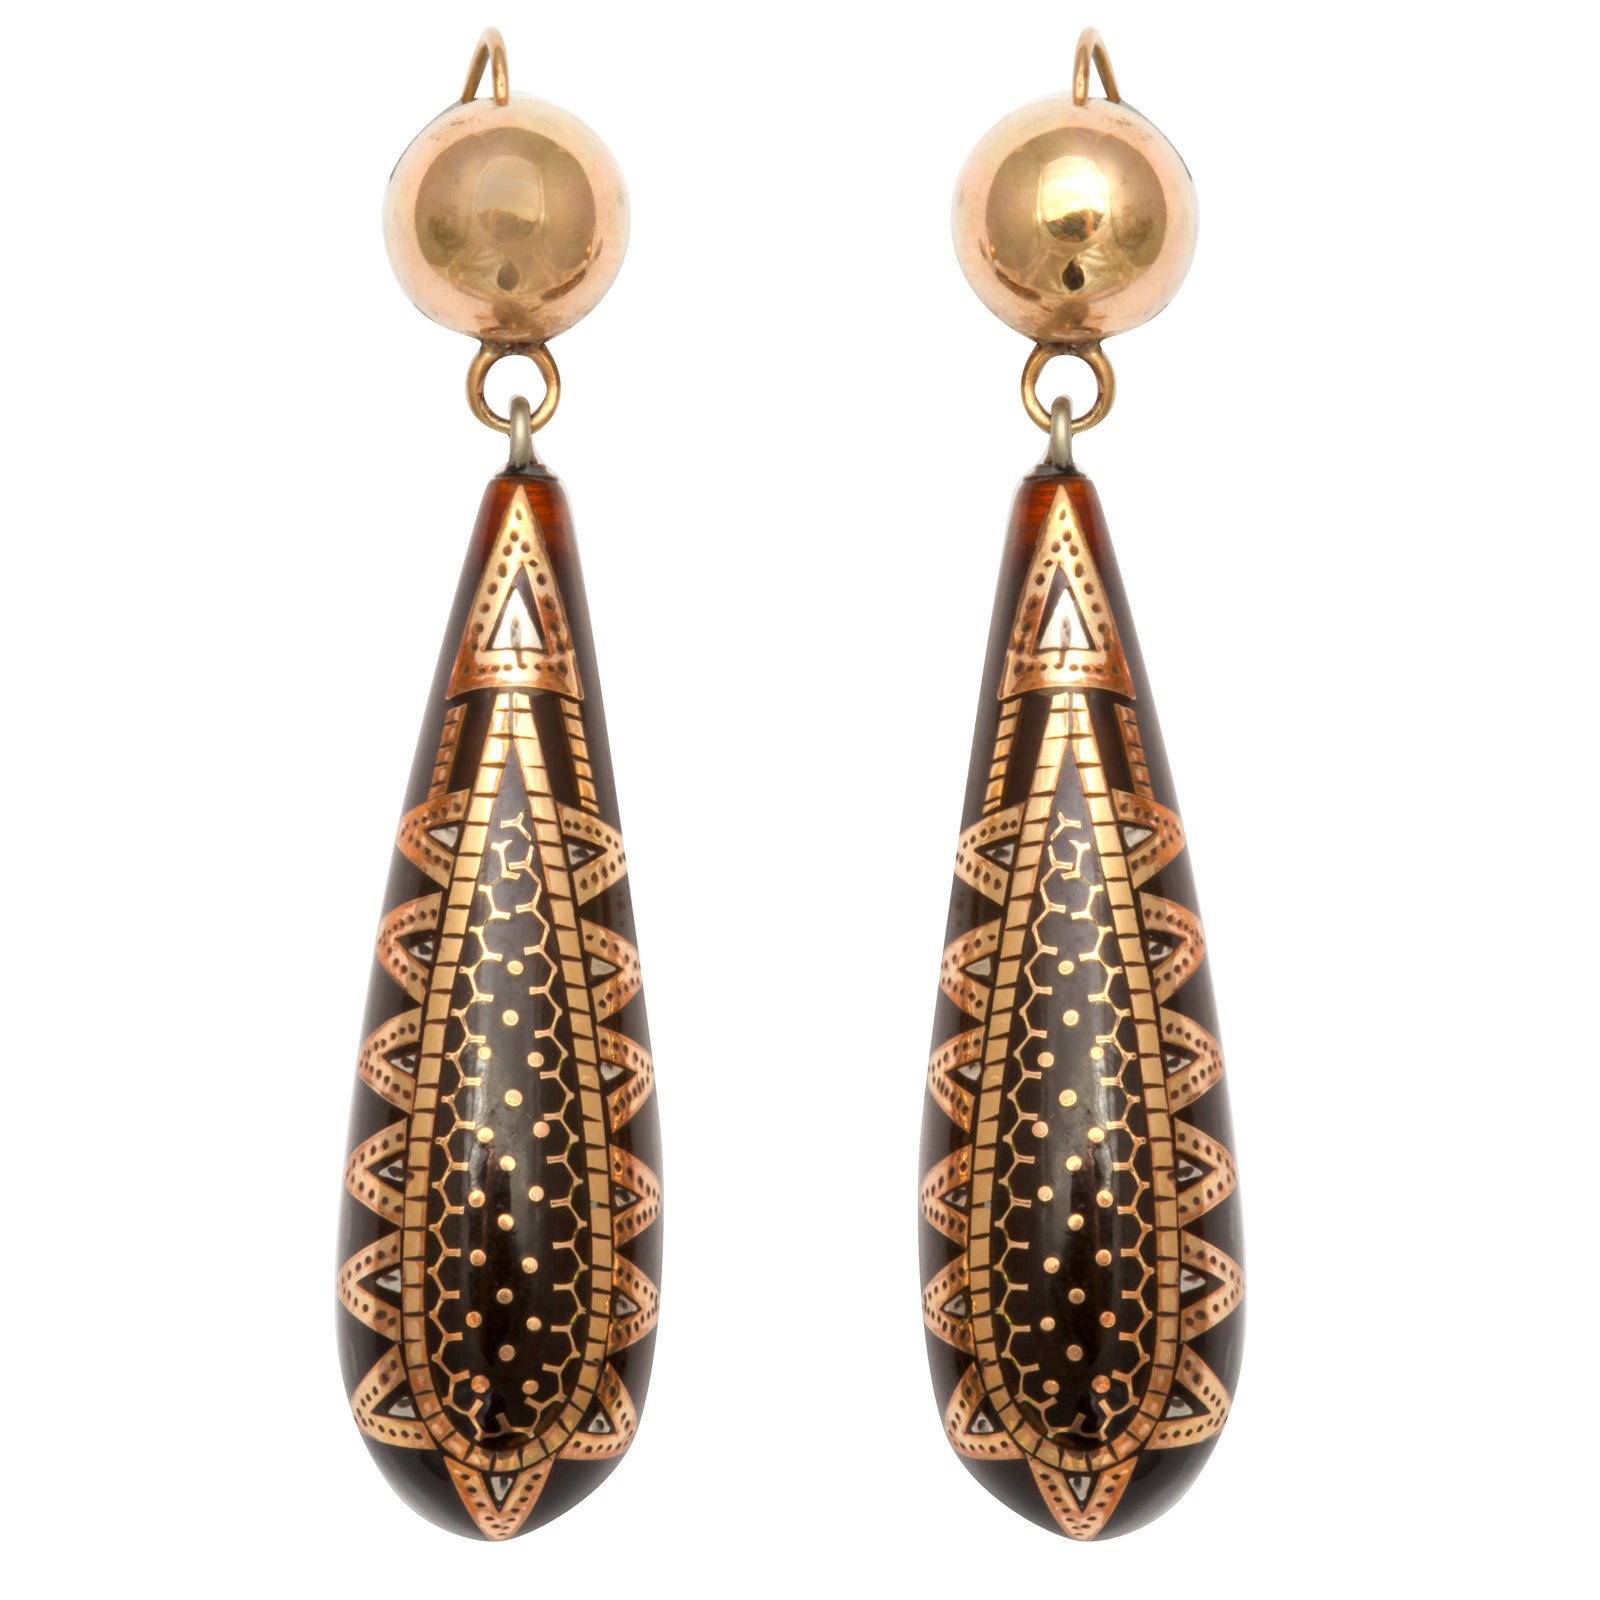 Sophisticated Victorian Gold and Tortoise Shell Earrings